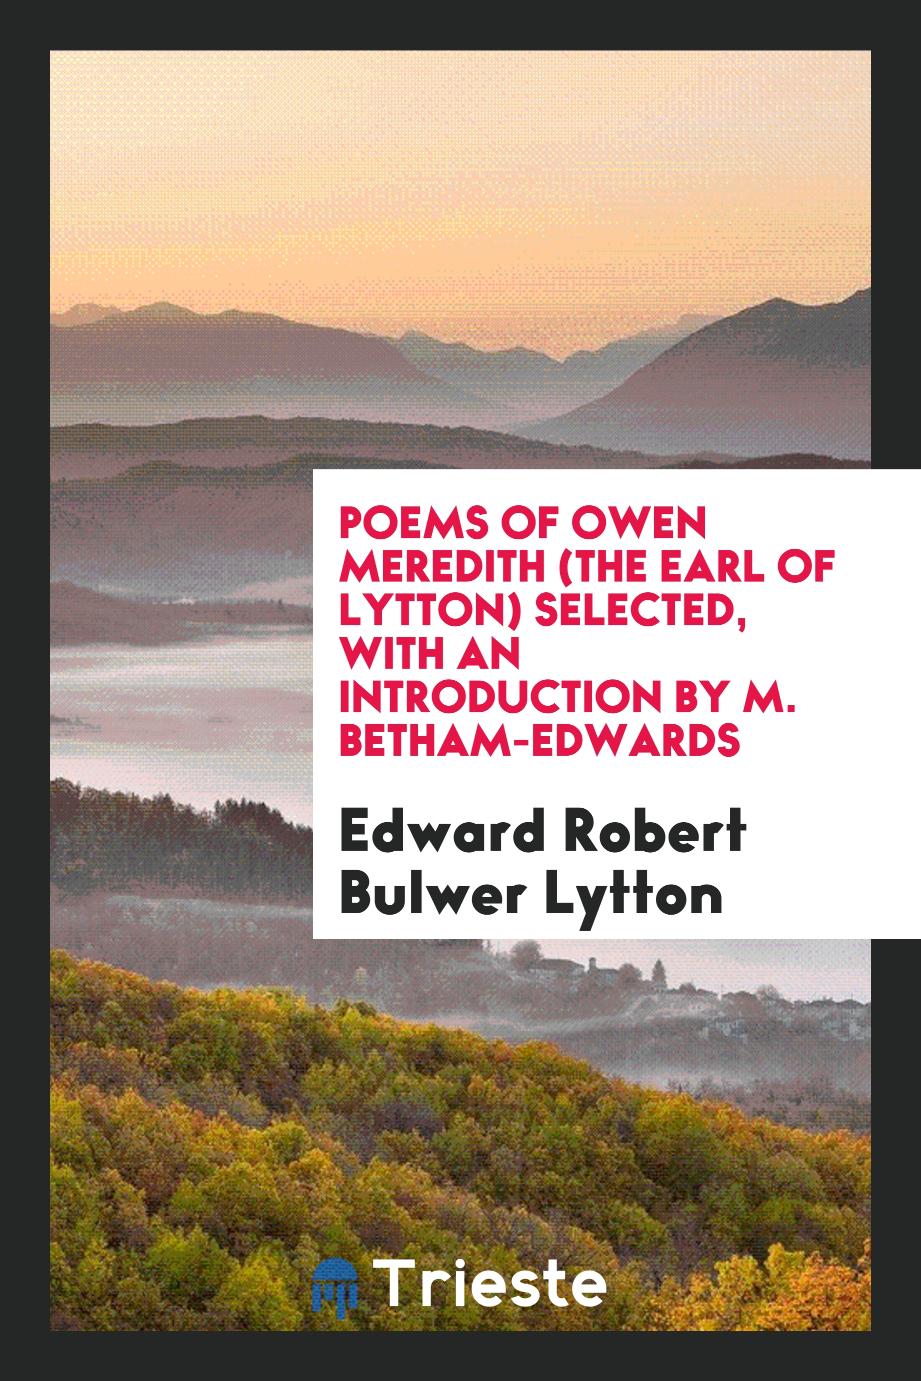 Edward Robert Bulwer Lytton - Poems of Owen Meredith (the earl of Lytton) Selected, with an introduction by M. Betham-Edwards